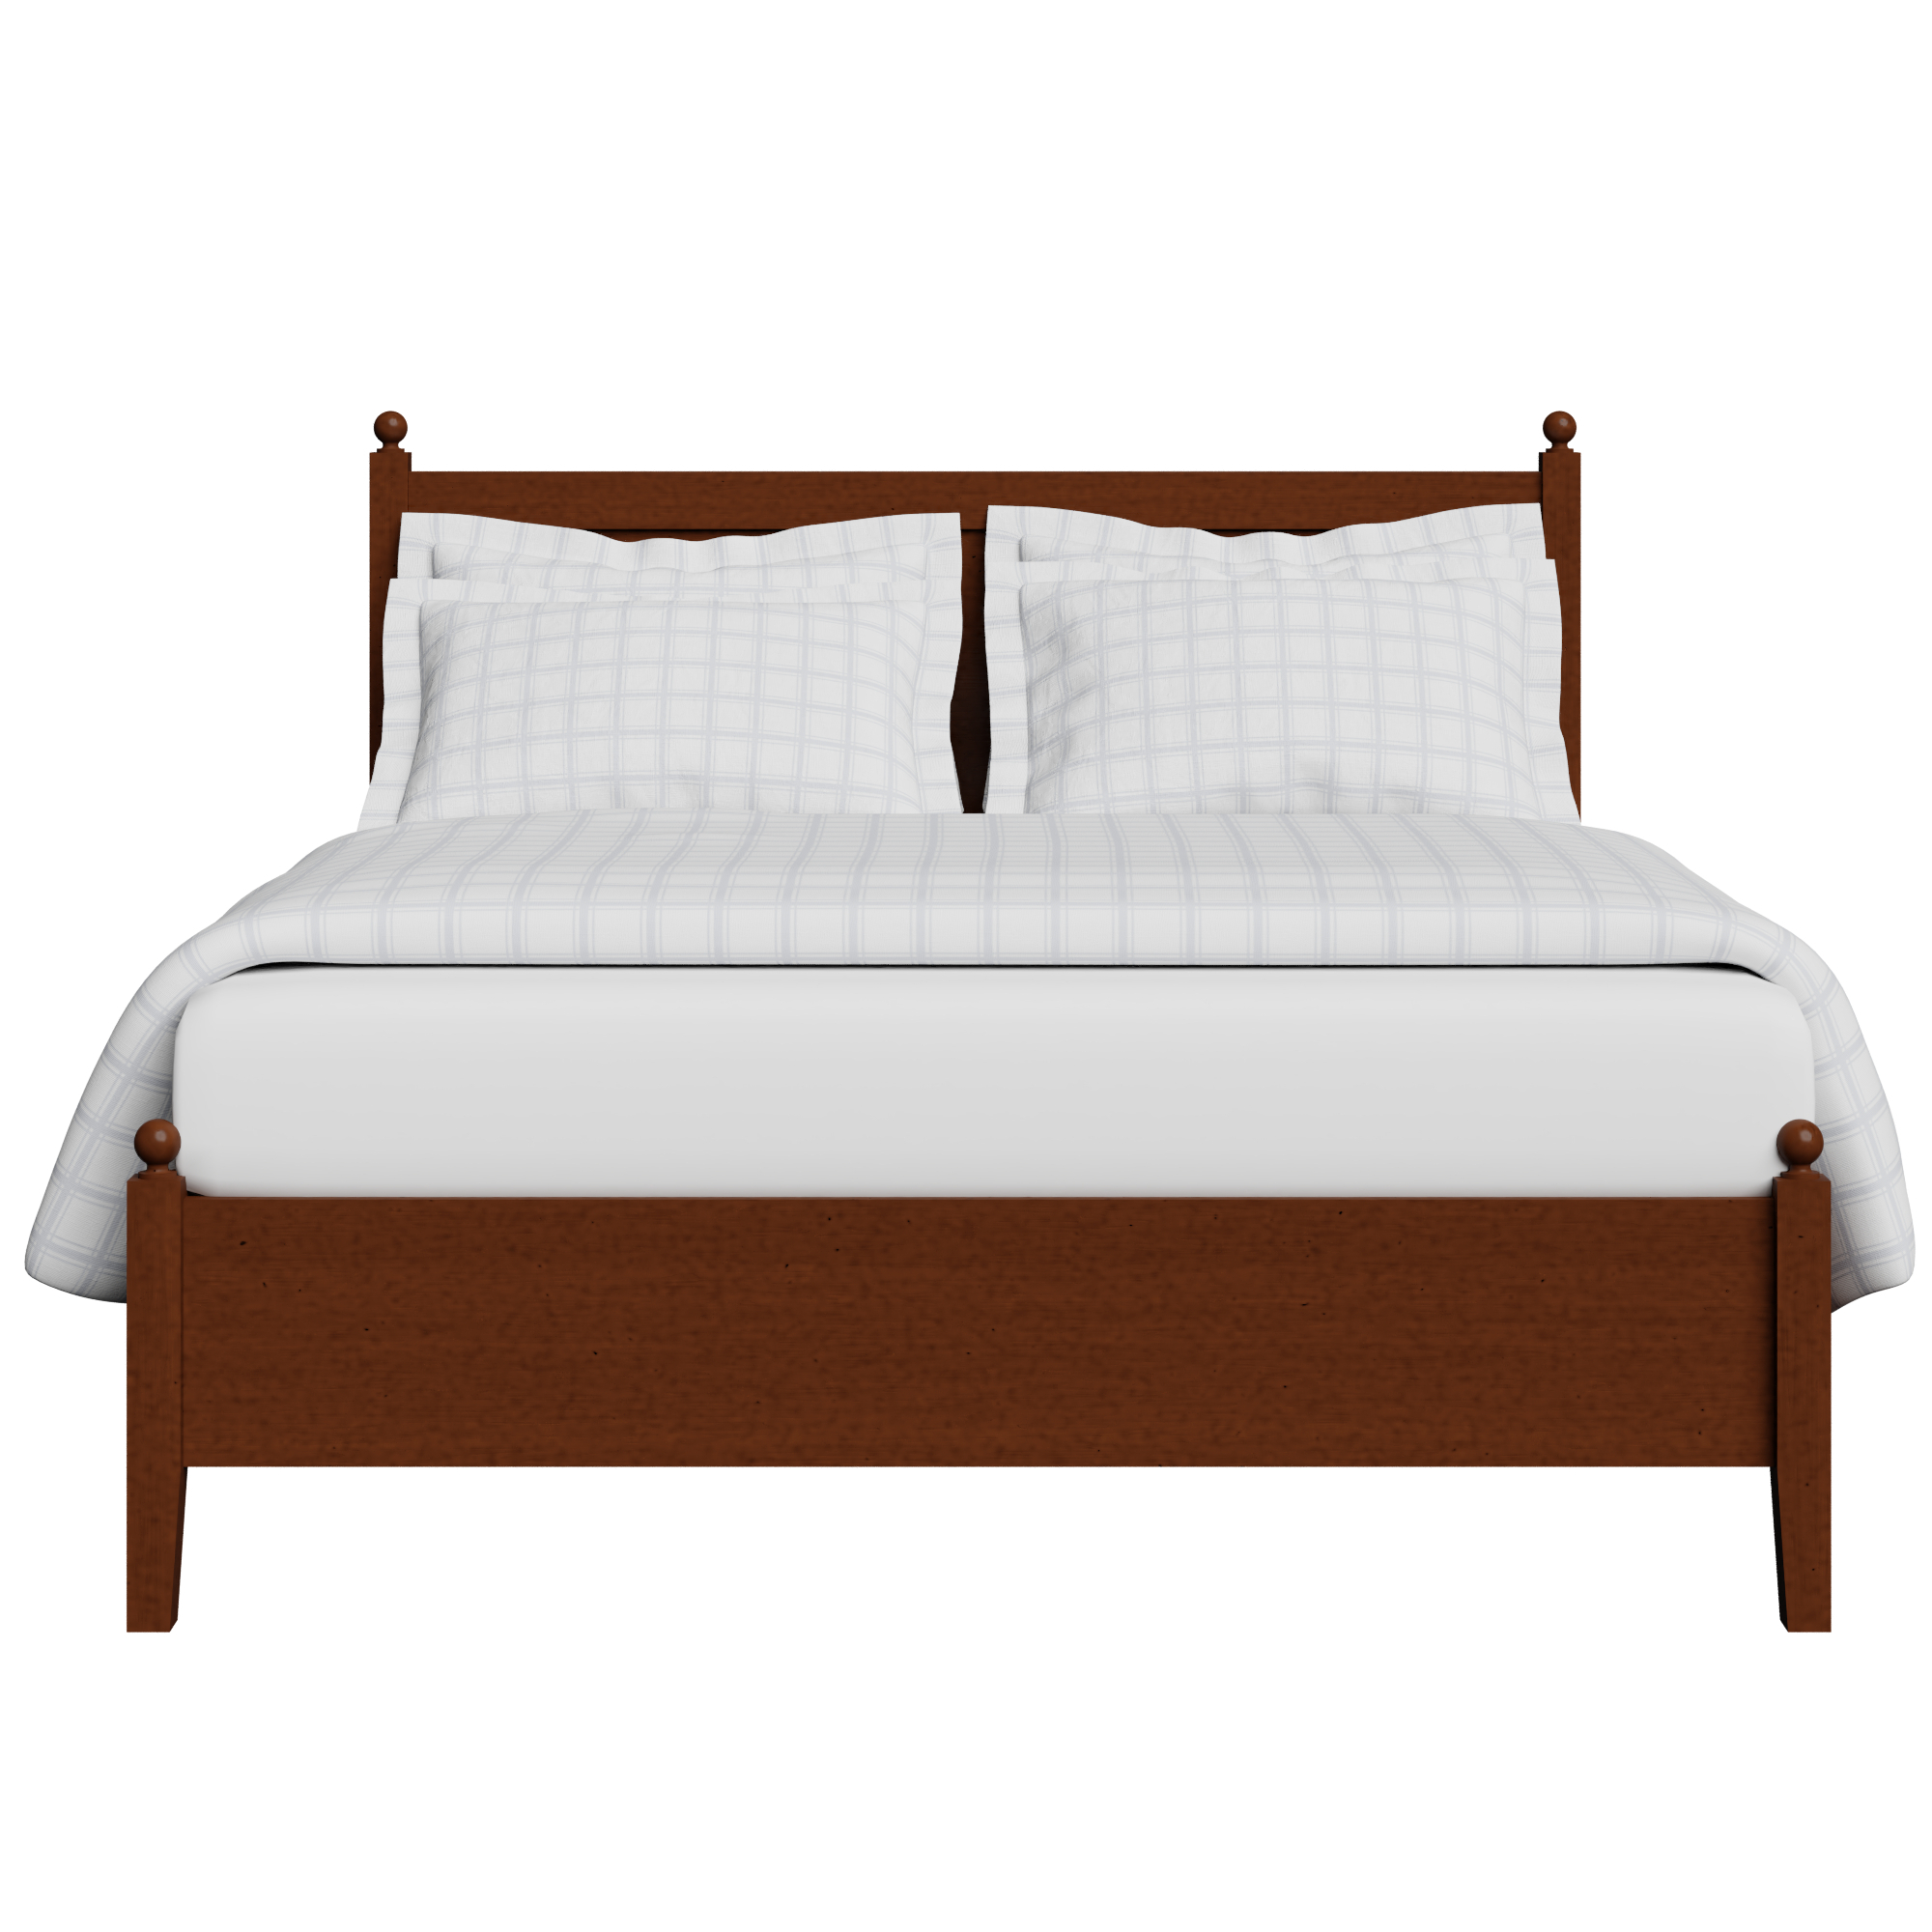 Marbella Low Footend Wooden Bed Frame, Dark Cherry King Size Beds